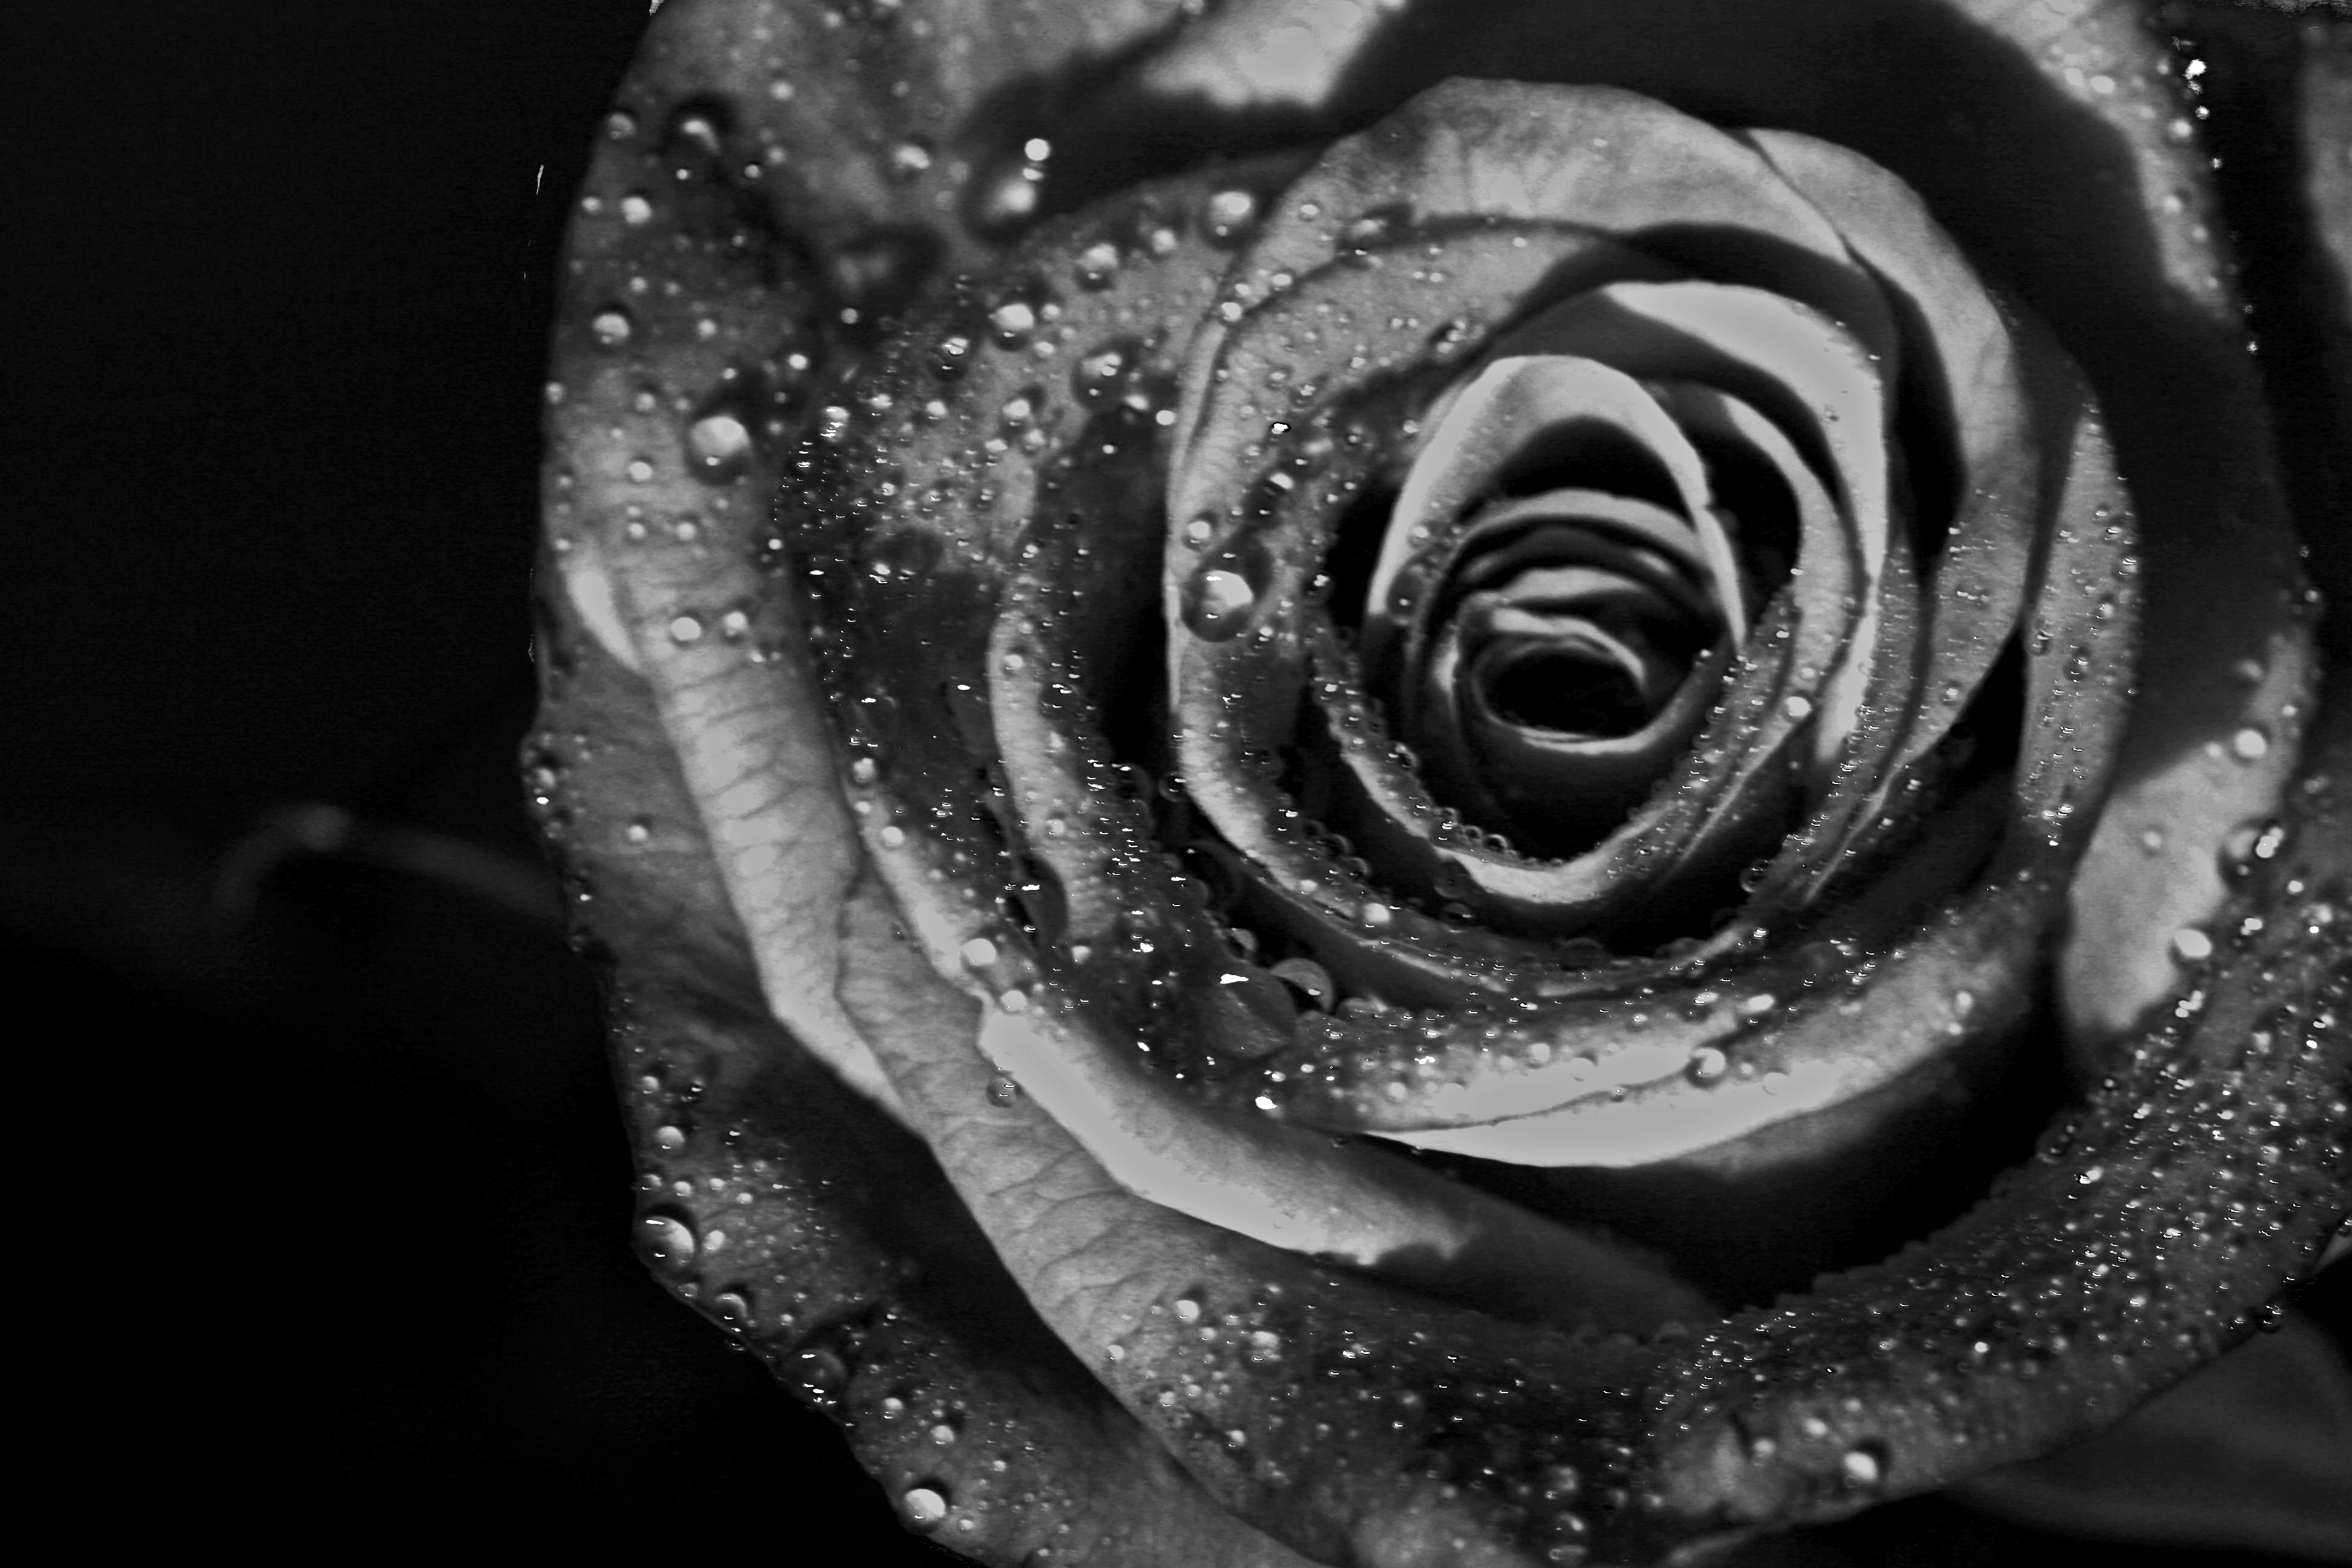 Free Download Black Roses Wallpapers Amp Pictures 38x2592 For Your Desktop Mobile Tablet Explore 76 Wallpaper Of Black Rose Black And White Rose Wallpaper Dark Red Roses Wallpaper Pink